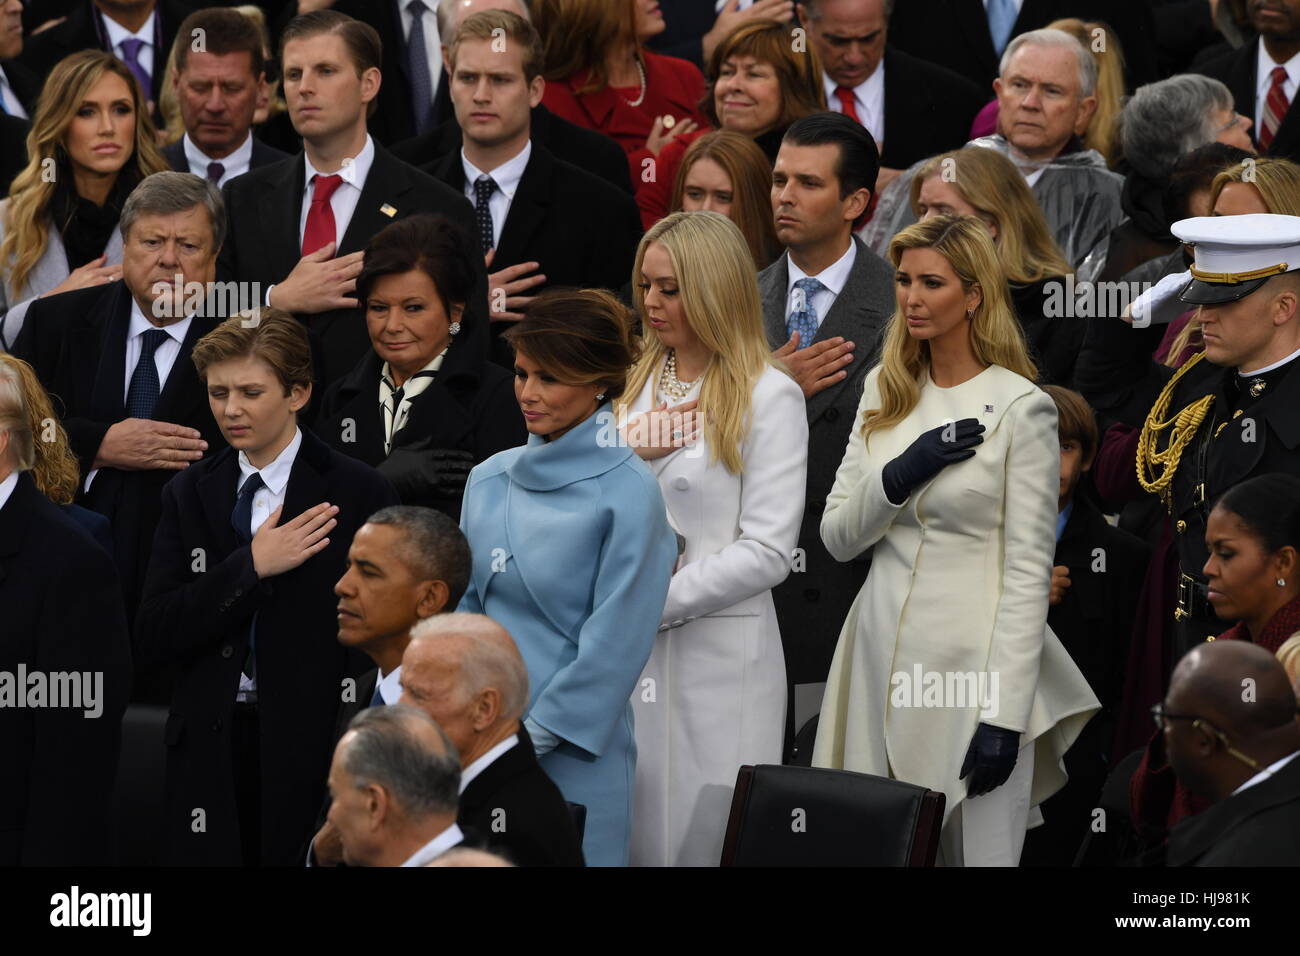 Melania Trump stands with the Trump family during the national anthem following the swearing in ceremony of her husband President Donald Trump during the President Inaugural Ceremony on Capitol Hill January 20, 2017 in Washington, DC. Donald Trump became the 45th President of the United States in the ceremony. Stock Photo